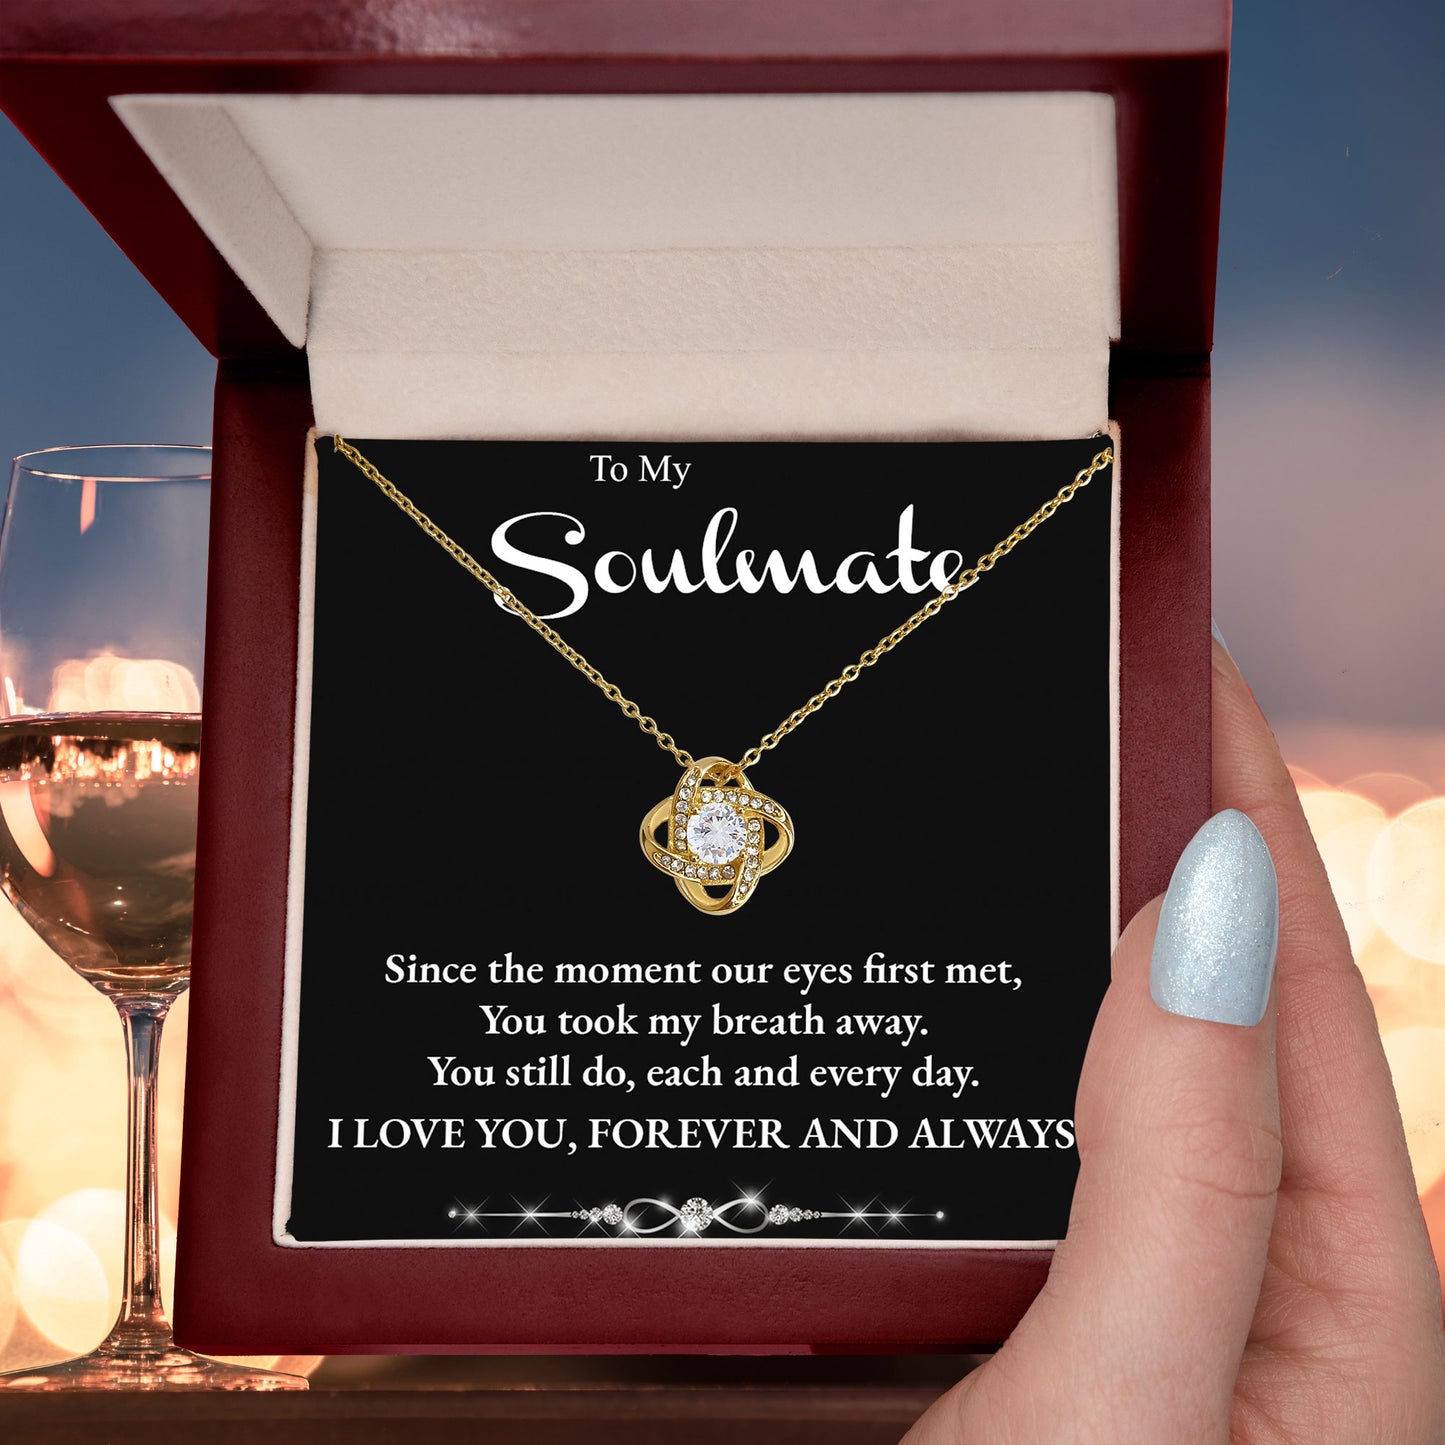 Soulmate You Took My Breath Away Love Forever and Always Pendant Necklace